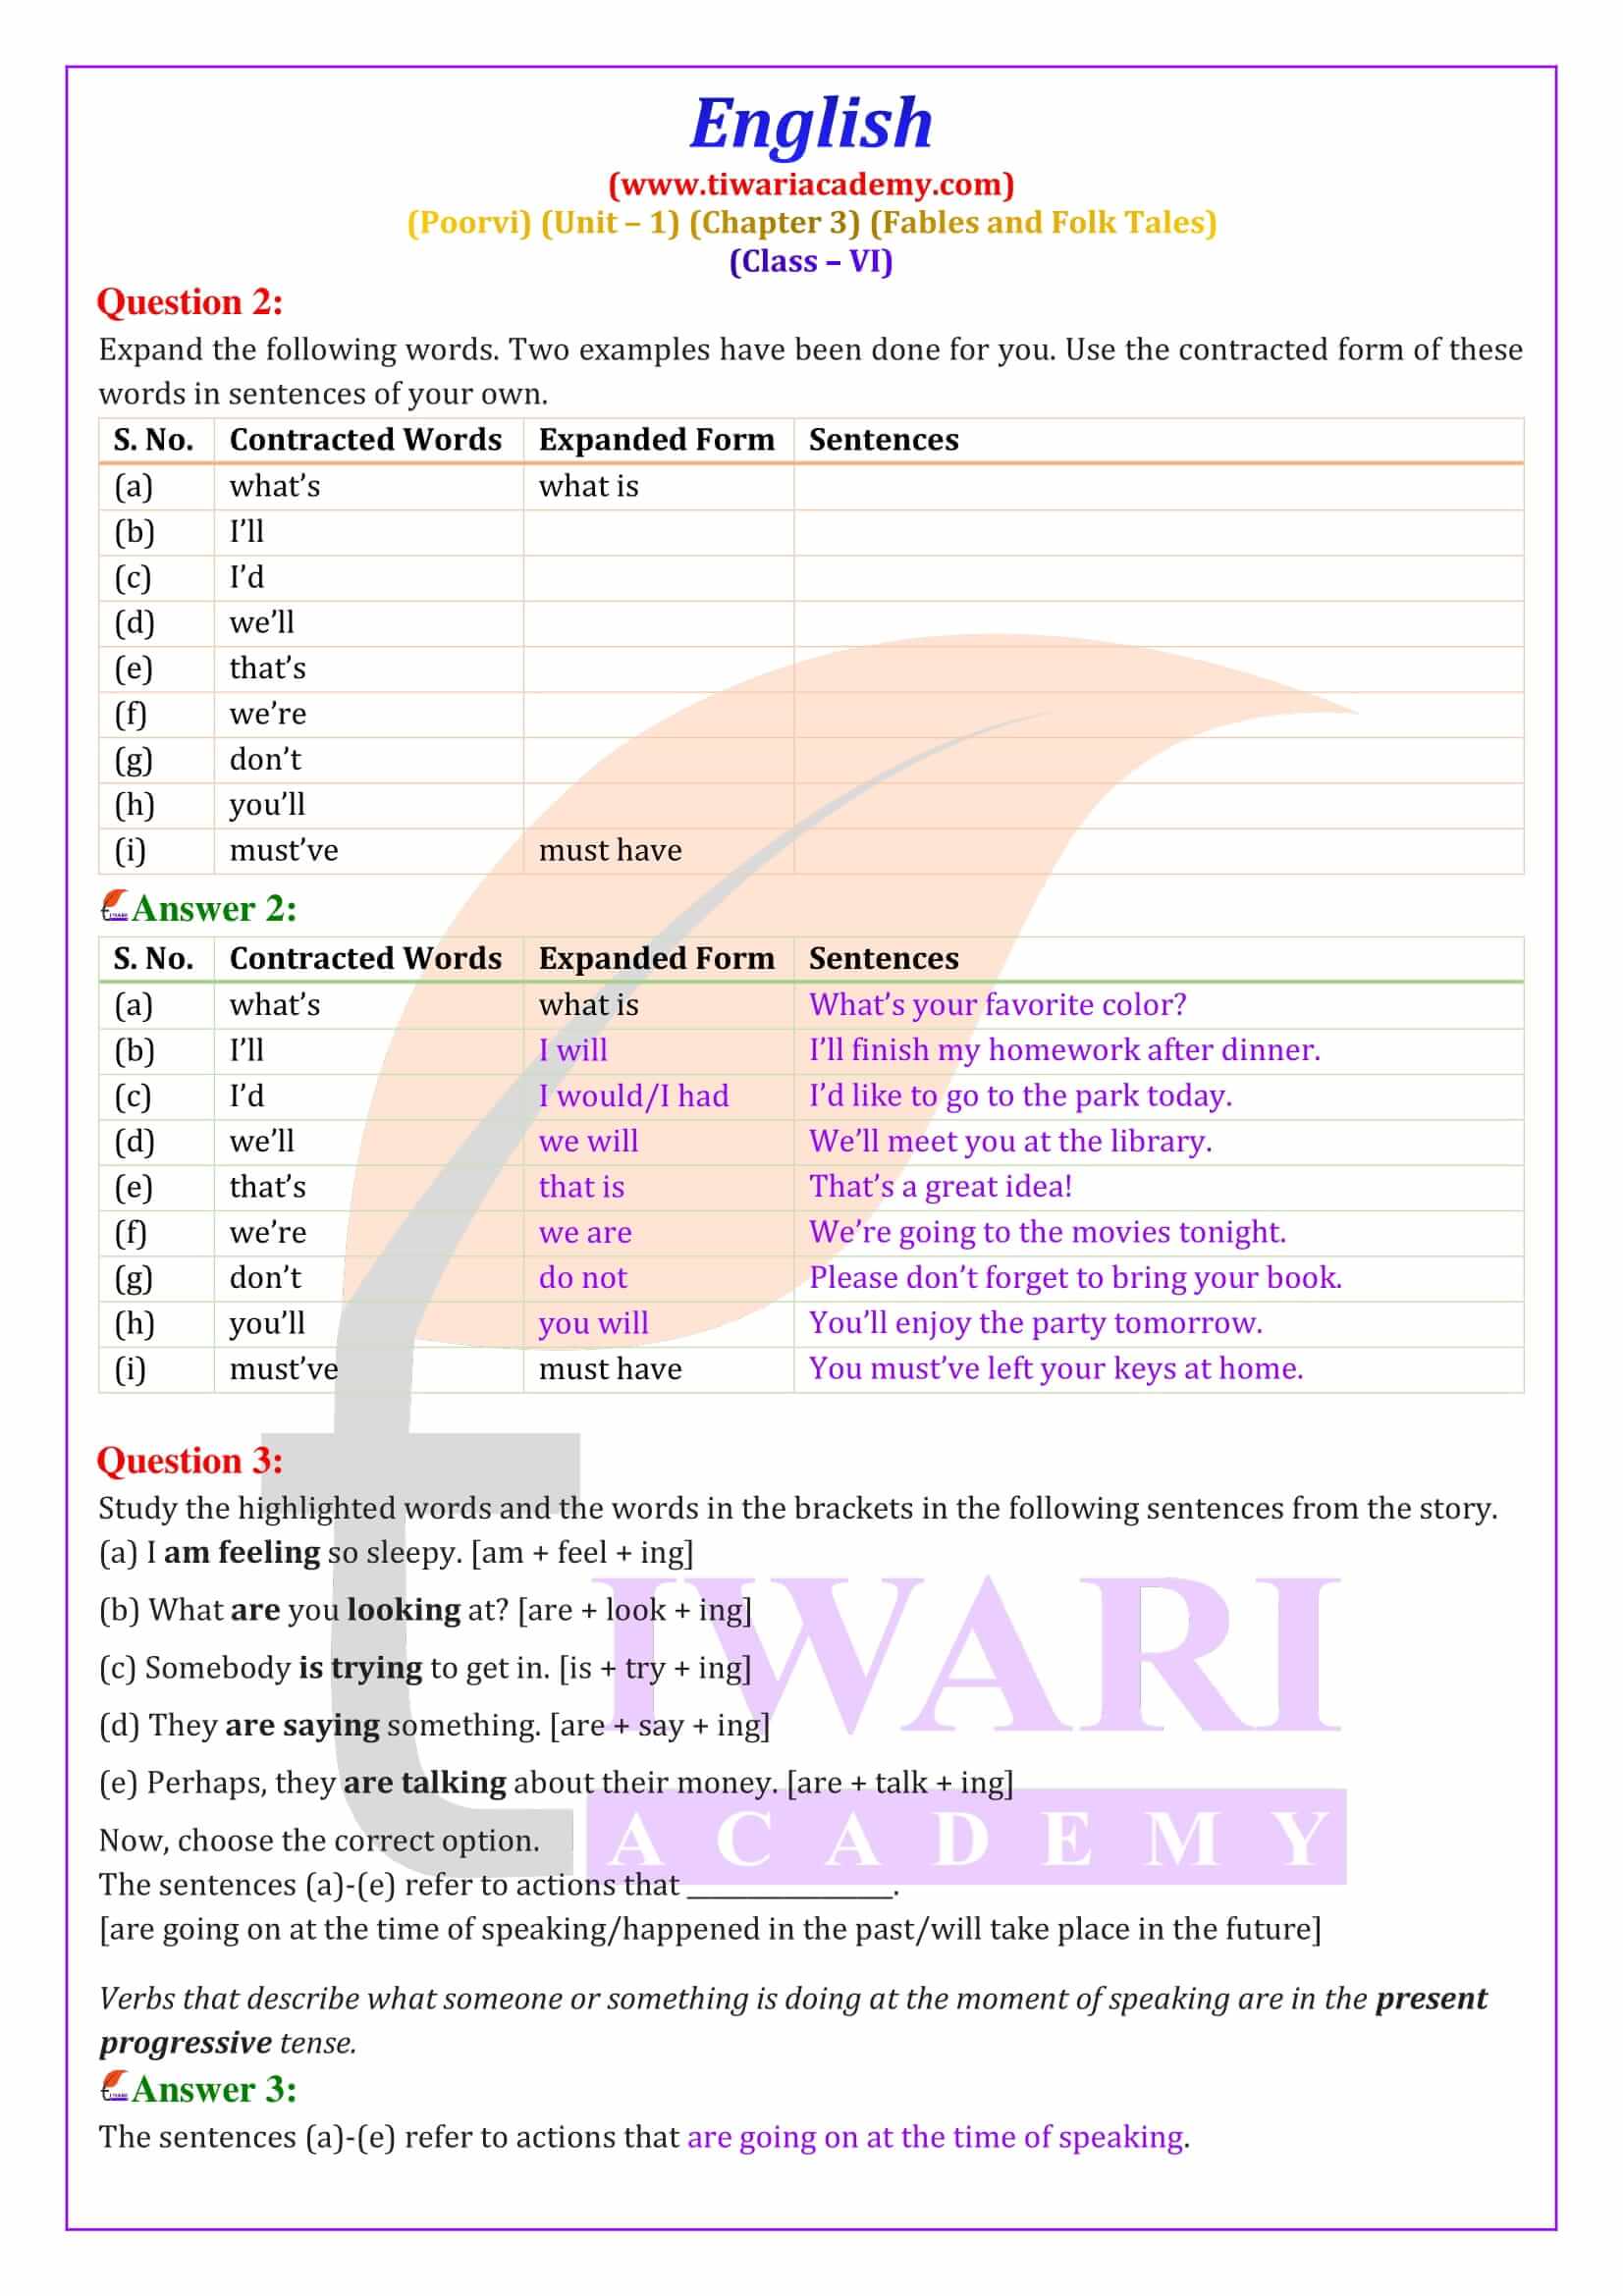 Class 6 English Poorvi Unit 1 Fables and Folk Tales Chapter 3 NCERT Solutions